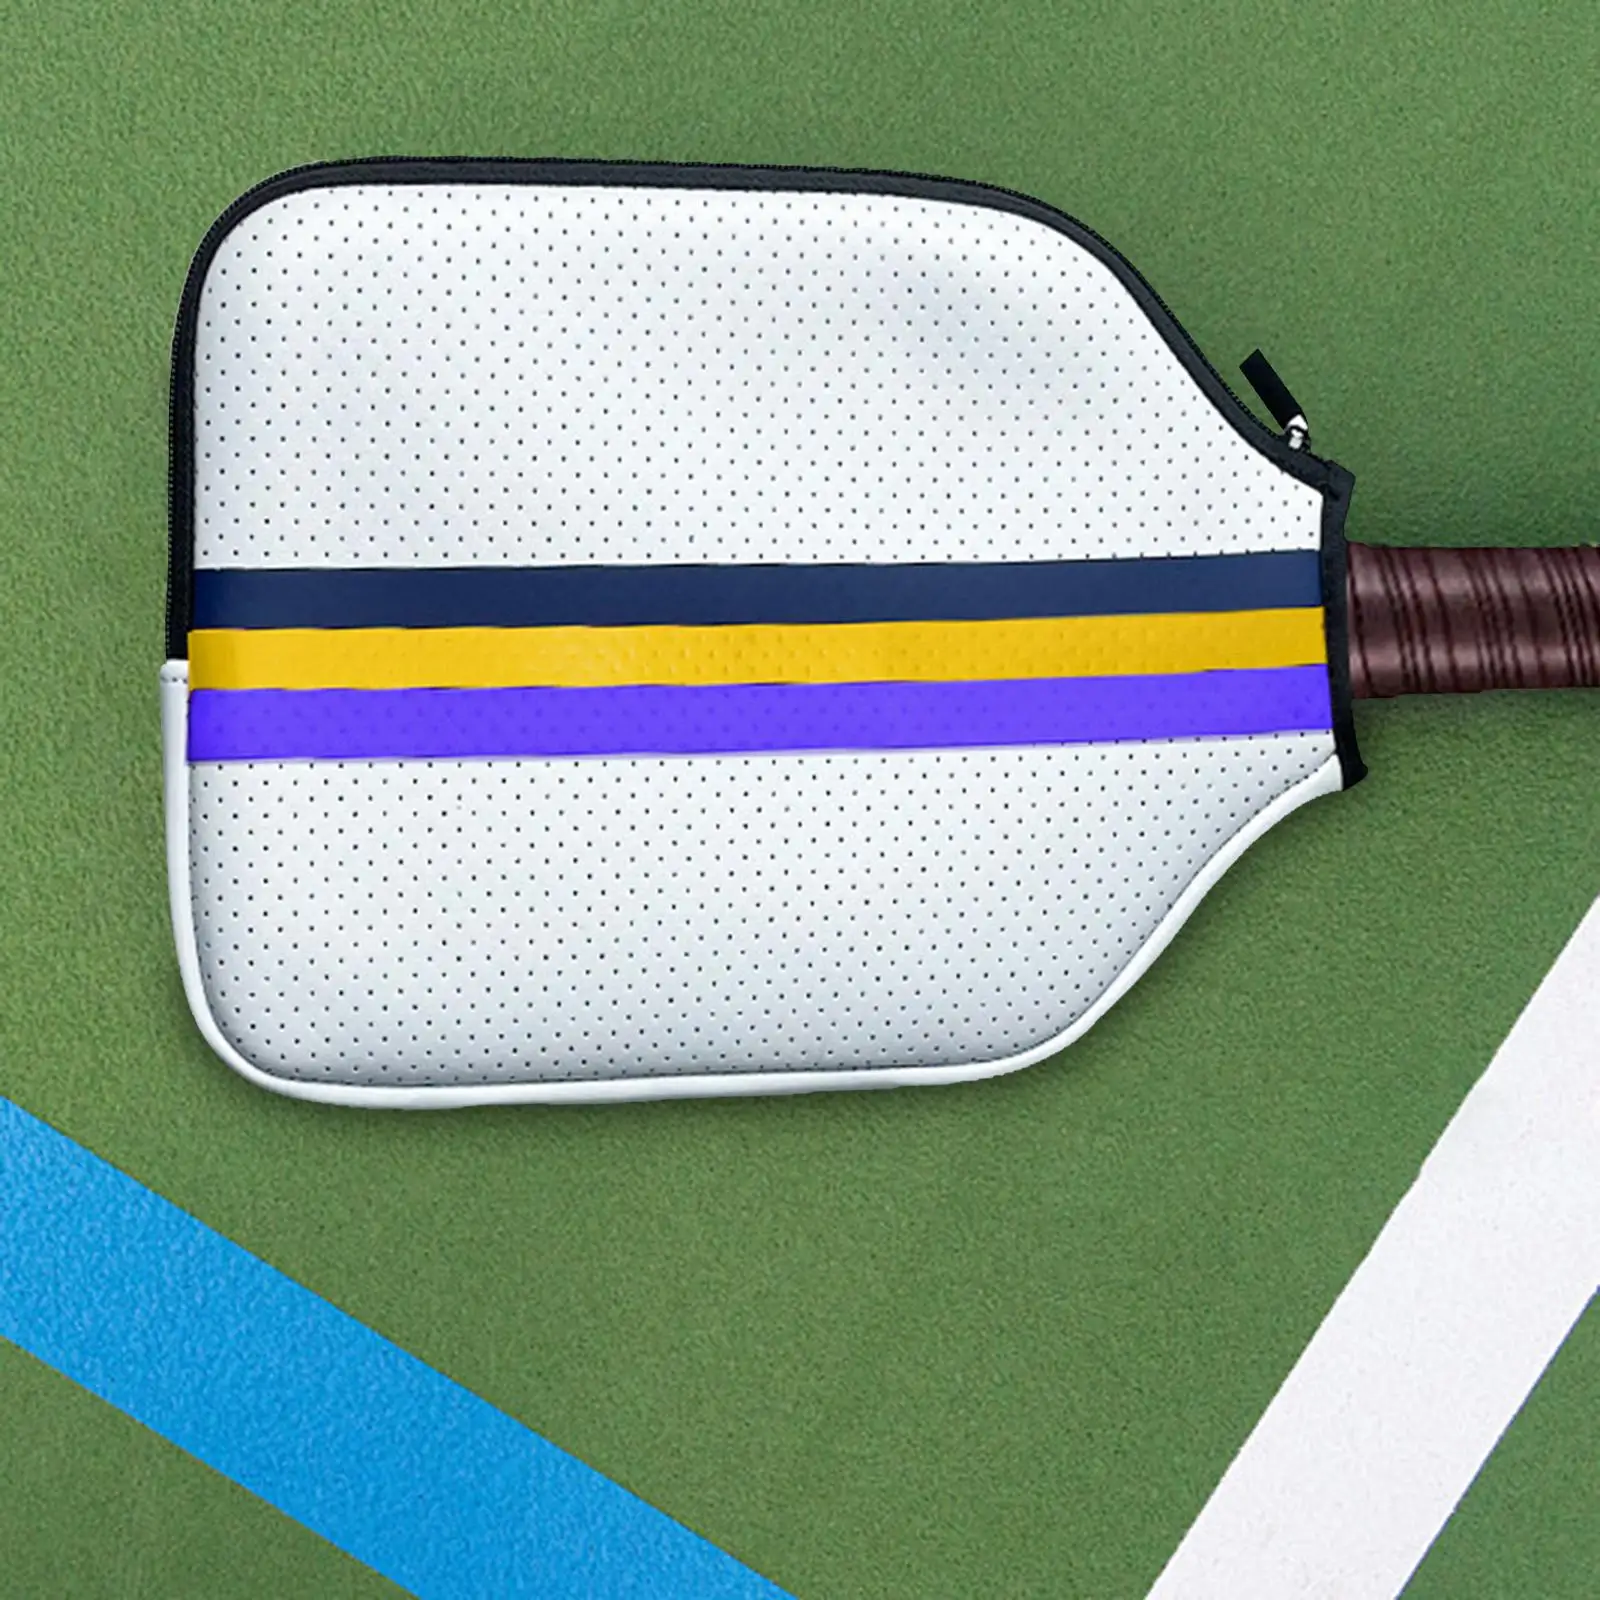 Neoprene Pickleball Paddle Cover Racket Case Durable Storage Protective Sleeve Racket Sleeve for Practice Training Sports